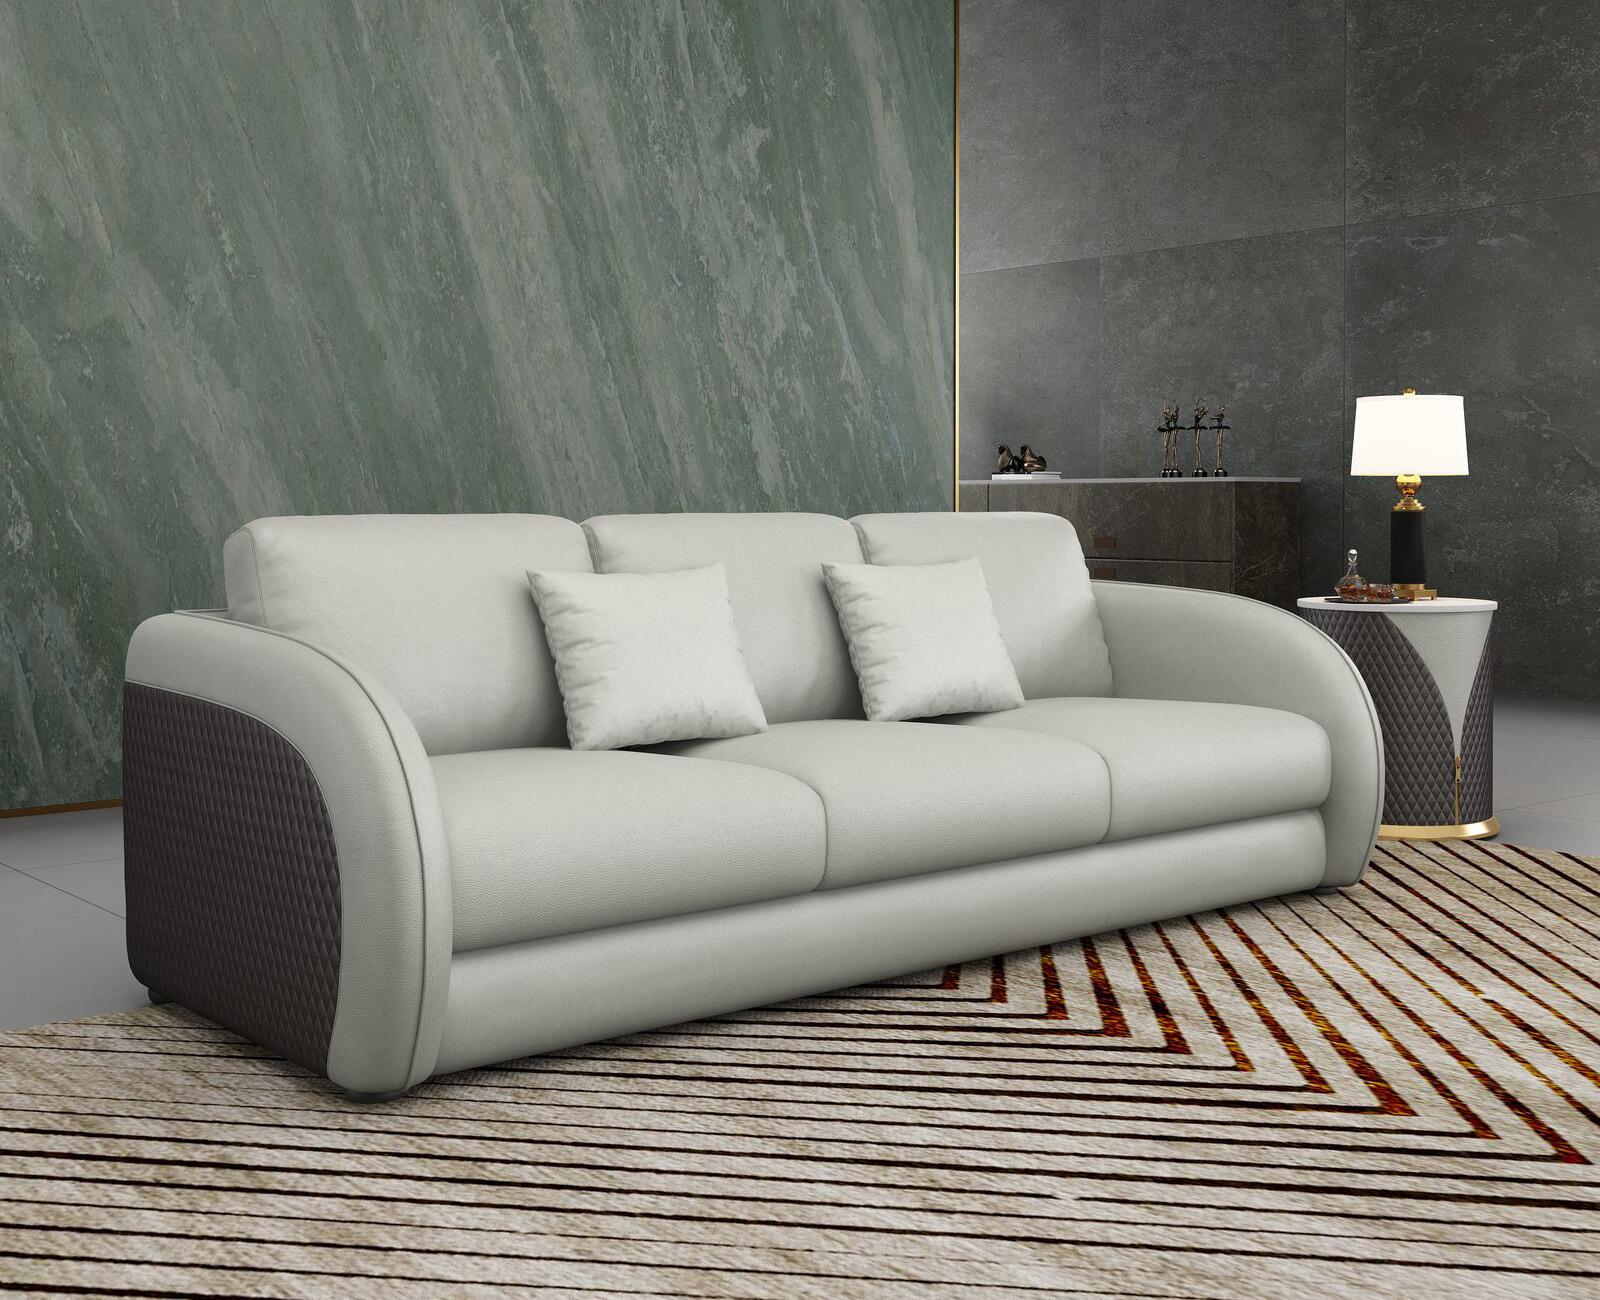 Contemporary, Modern Sofa NOIR EF-90882-S in Light Grey, Chocolate Leather